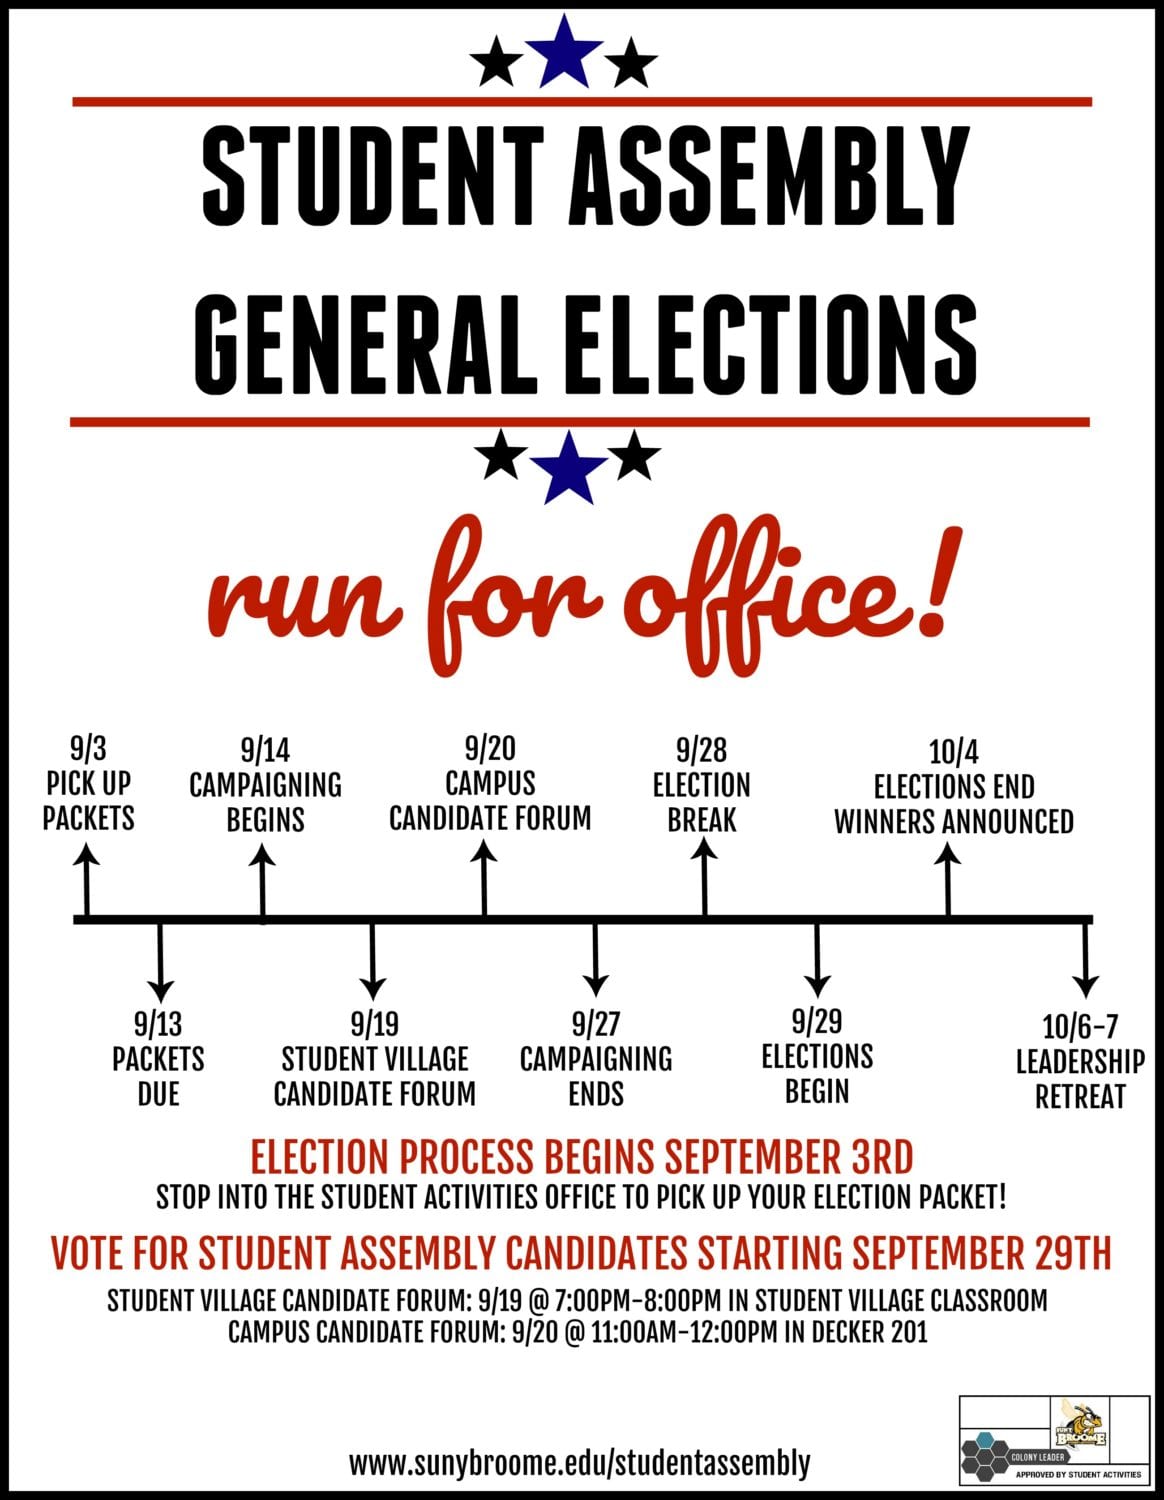 Get involved: Run for office in the Student Assembly General Election!